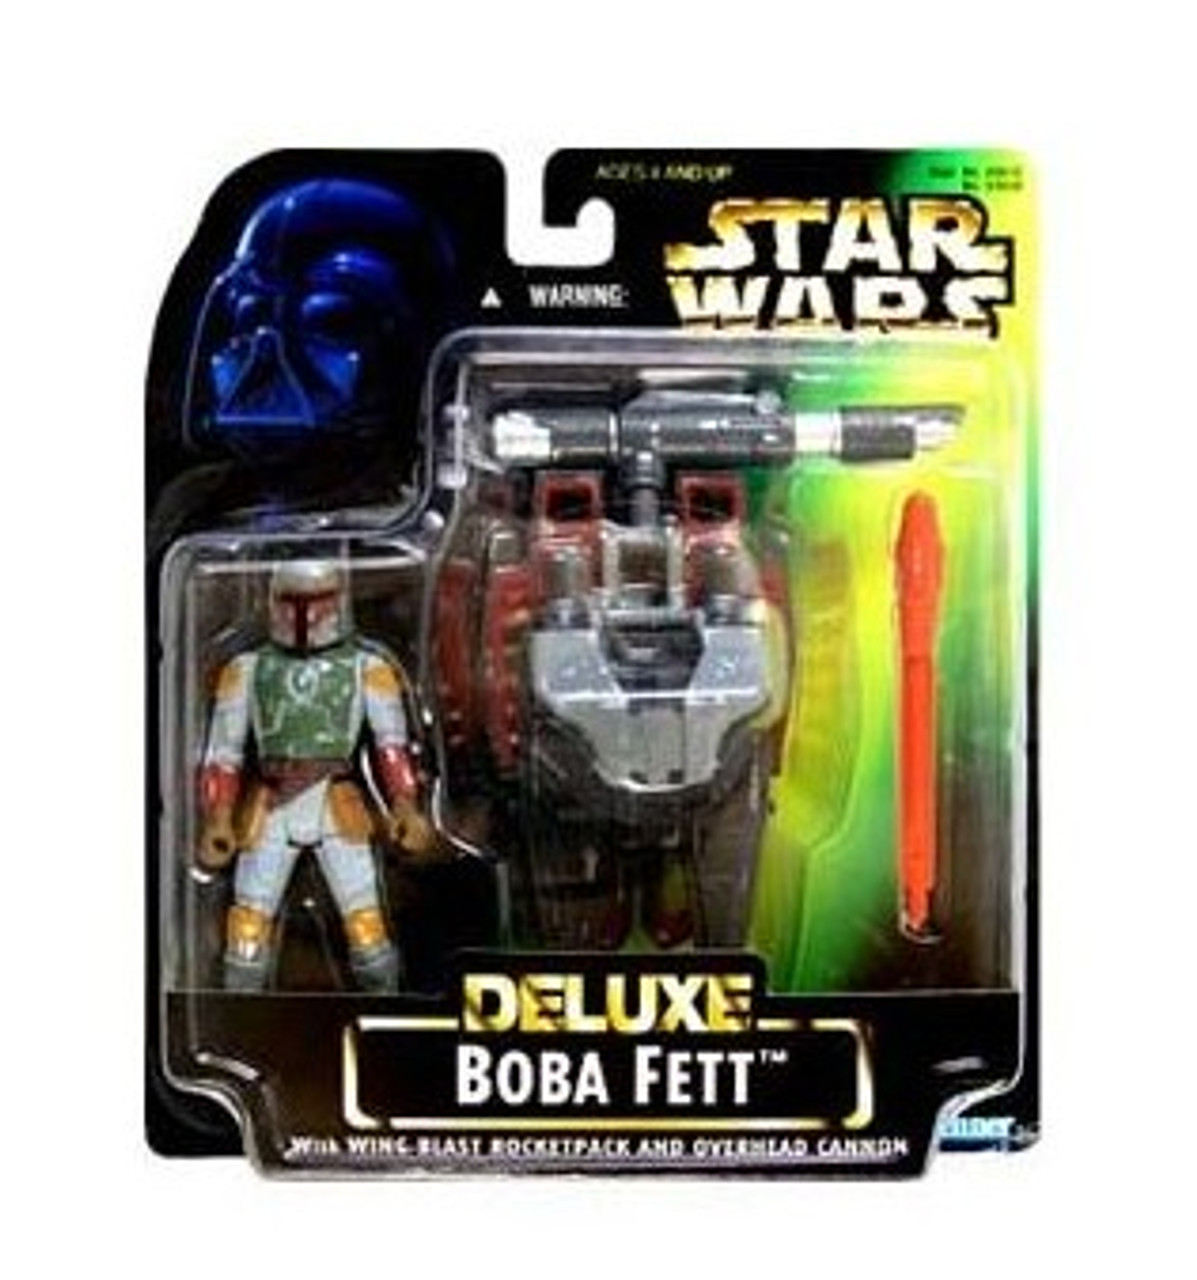 Kenner Star Wars The Power of the Force Boba Fett Action Figure for sale online 